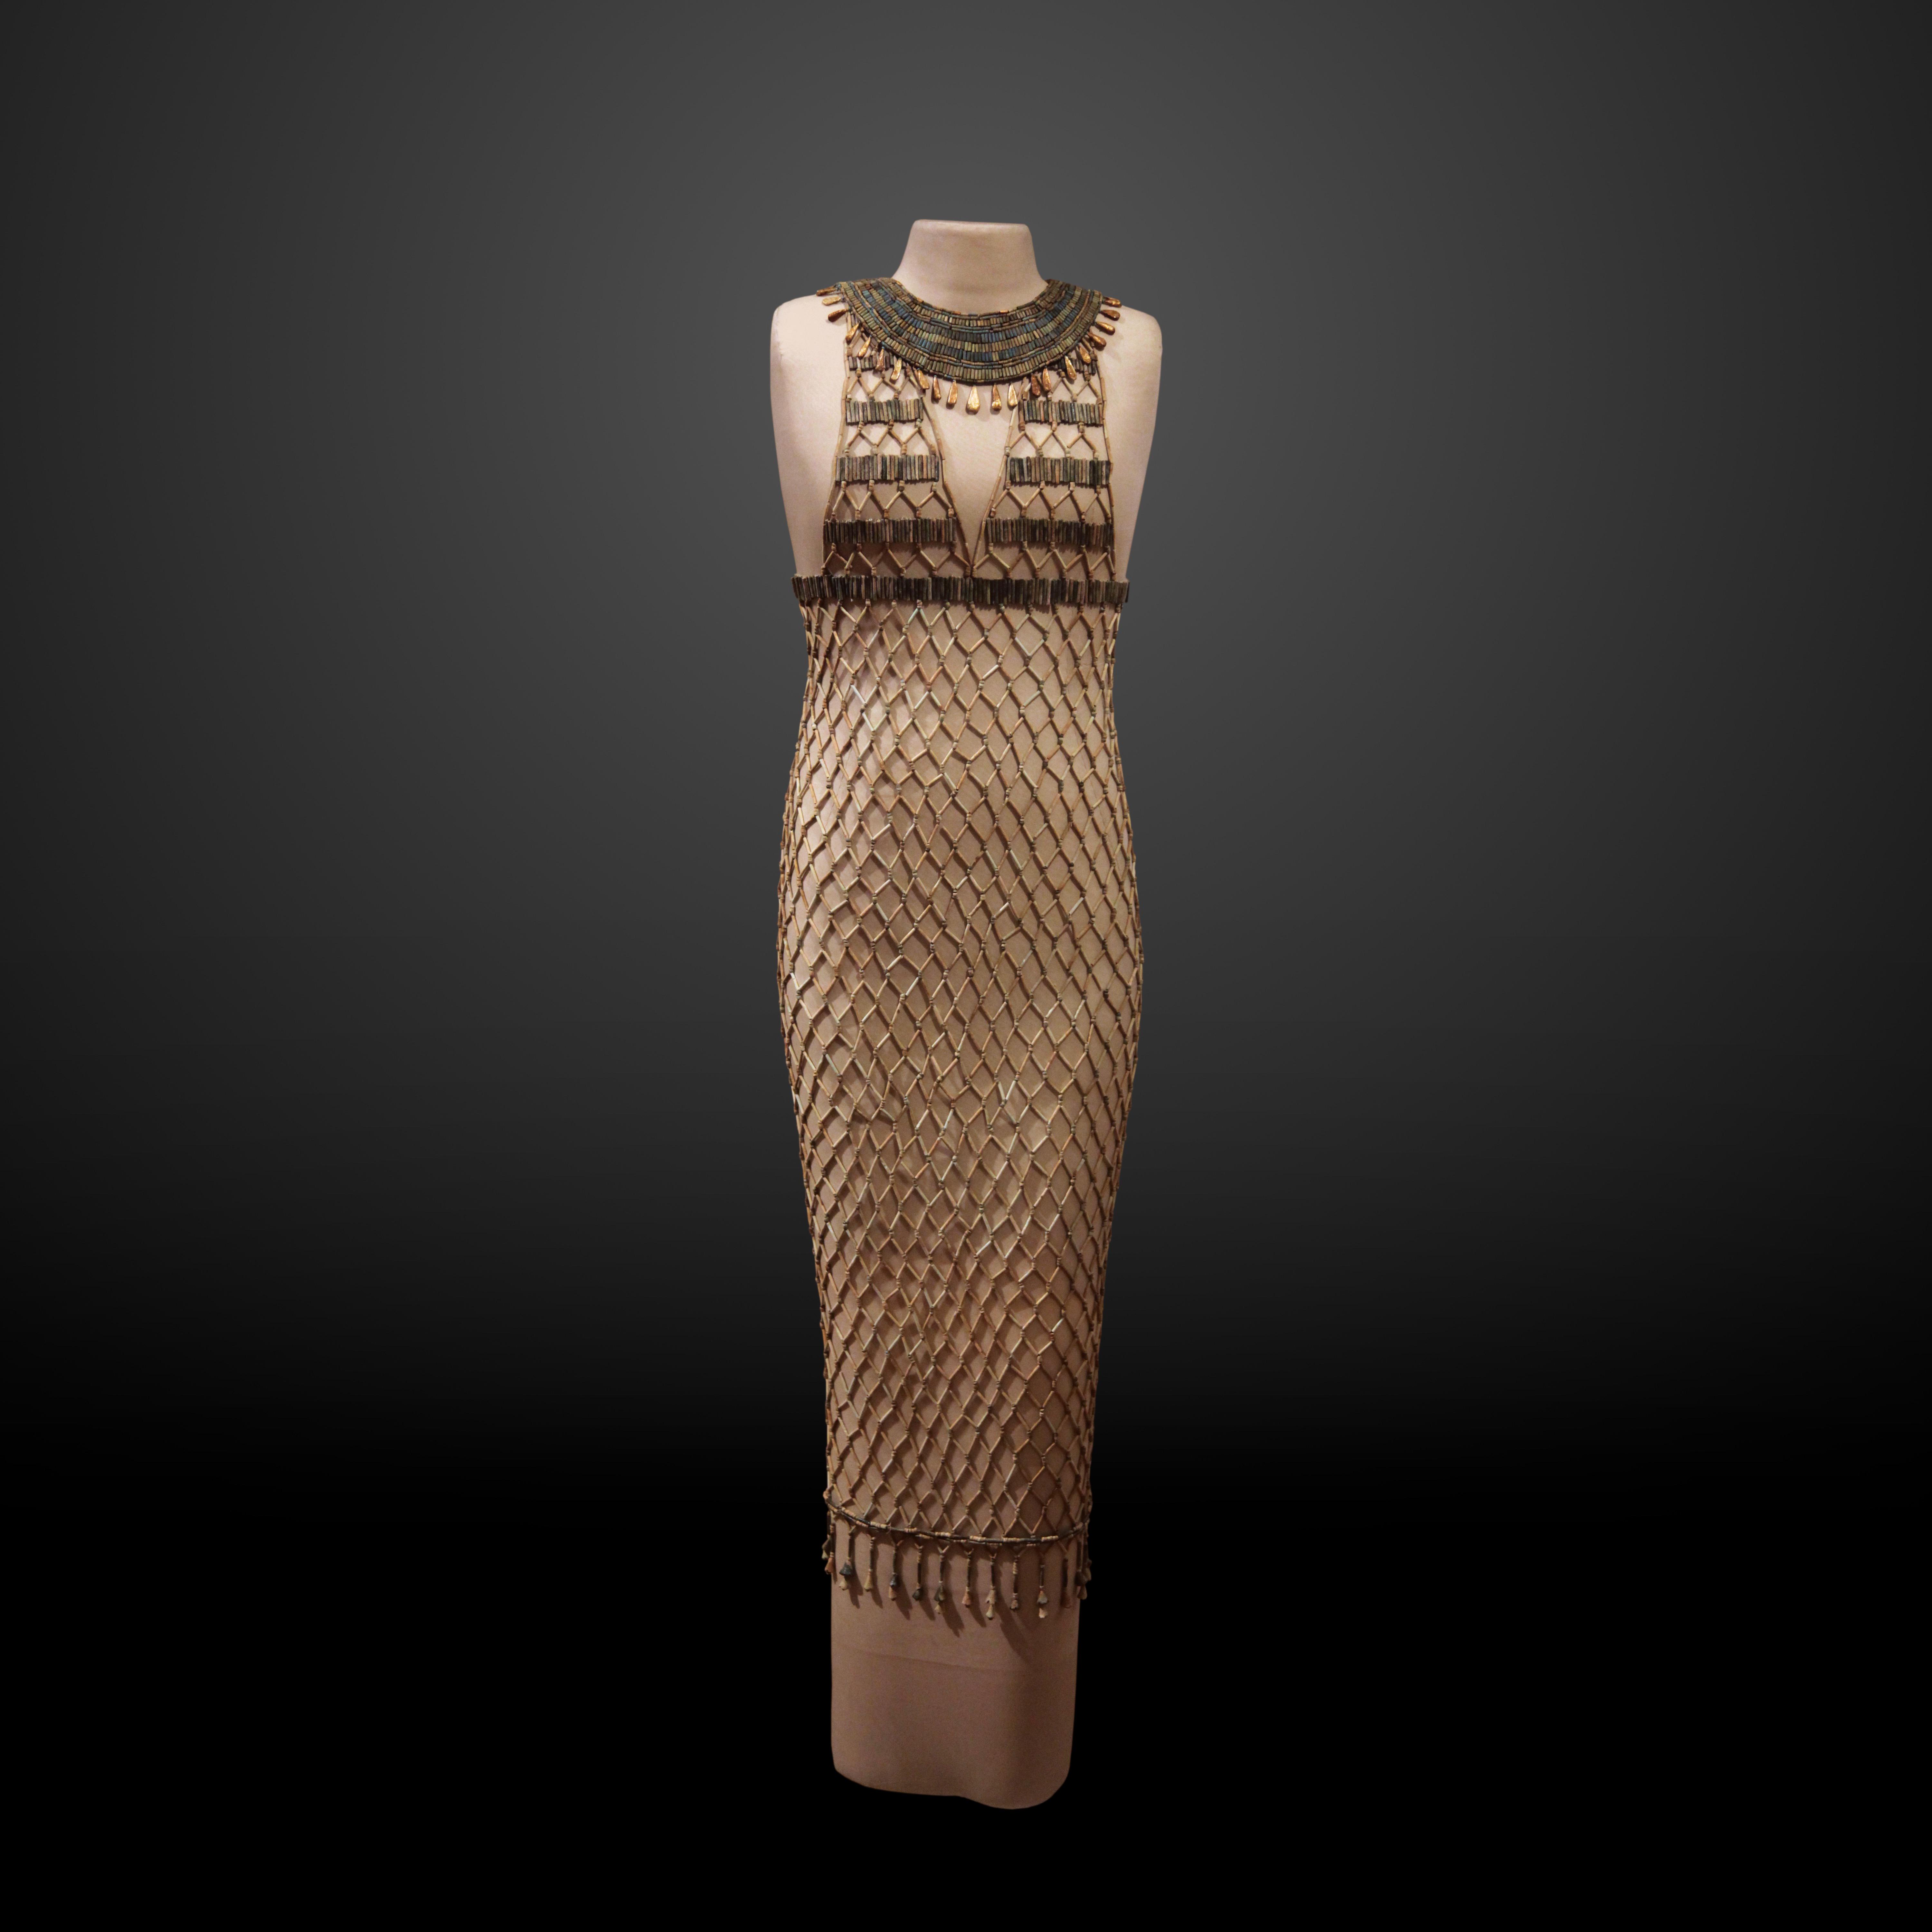 Egyptian faience beaded fishnet dress dating from the Fourth Dynasty, c. 2550 BCE.jpeg